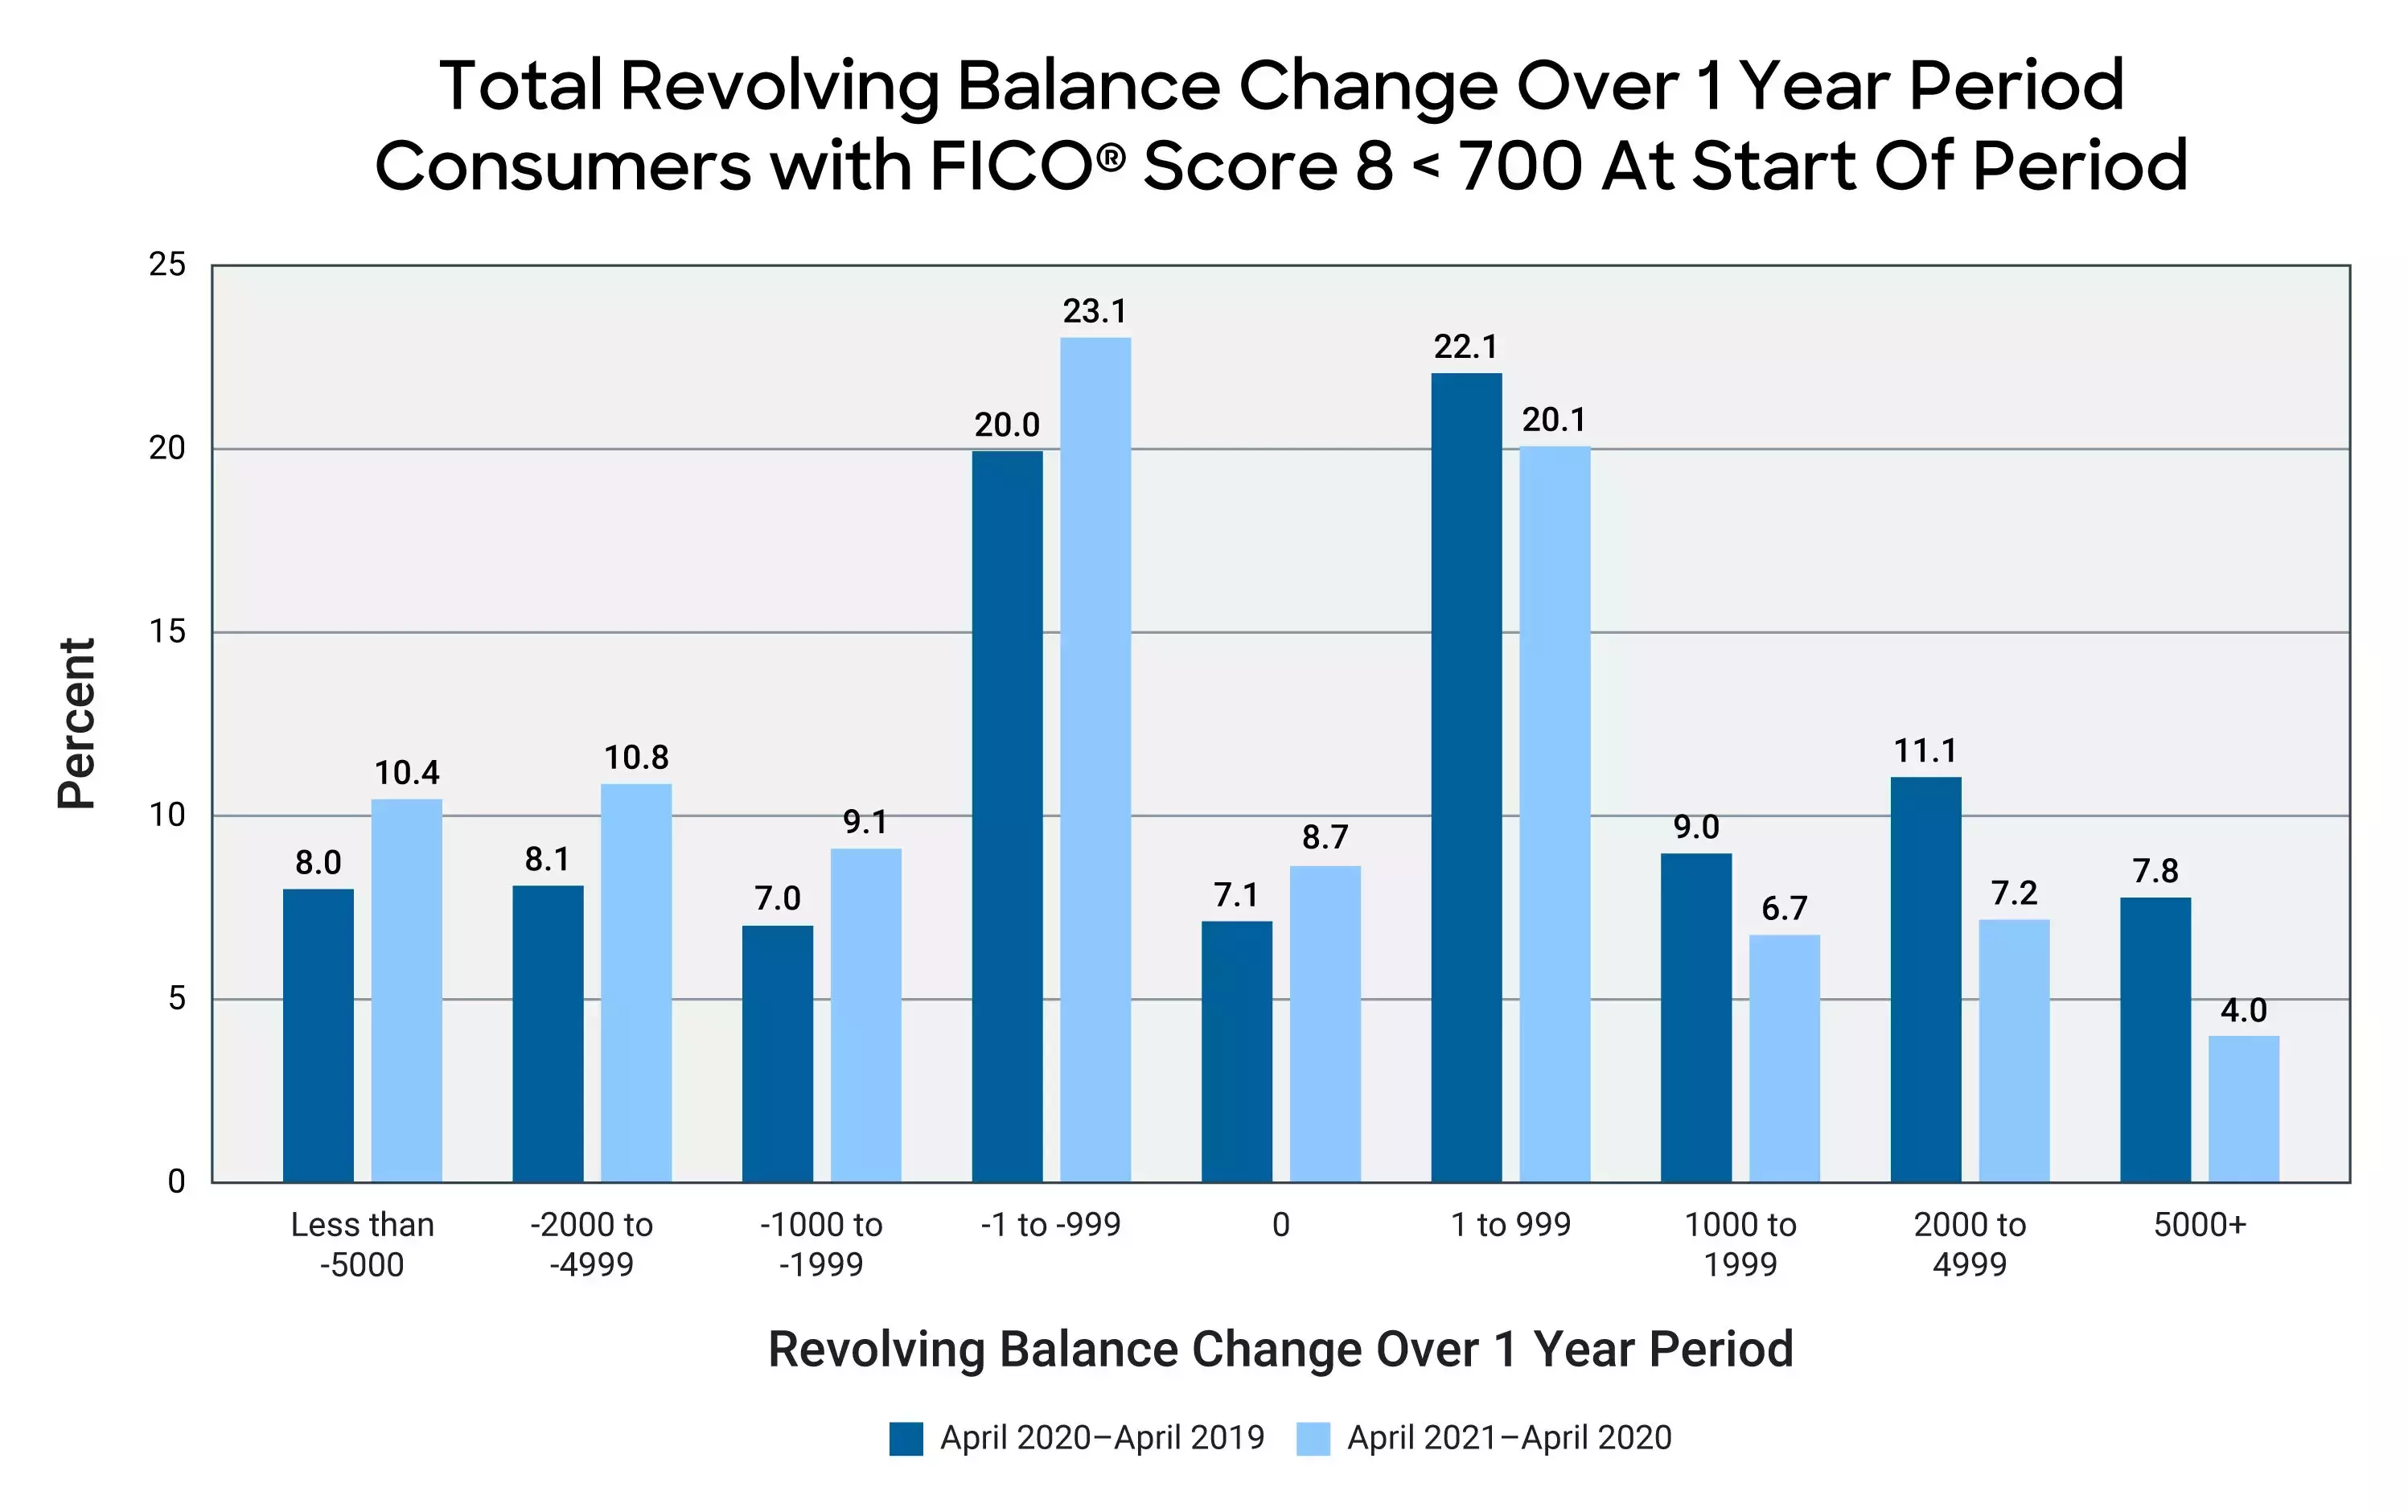 Total Revolving Balance Change Over 1 Year Period for Consumers with FICO Score 8 < 700 at Start of Period